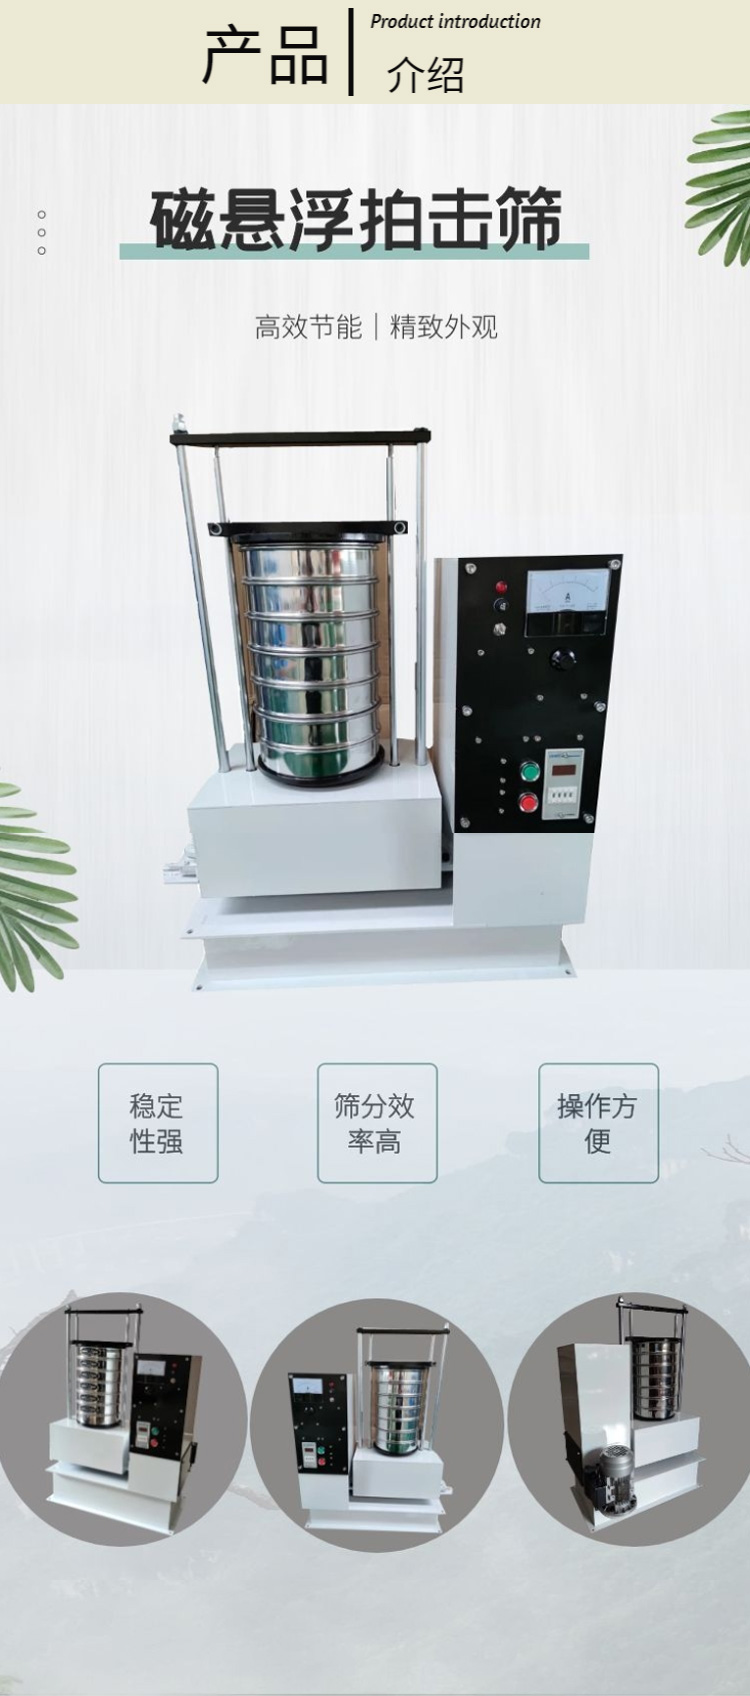 Particle size inspection, impact sieve, magnetic suspension experimental sieve, coal and soil sampling sieve, vibrating standard test sieve for experimental use